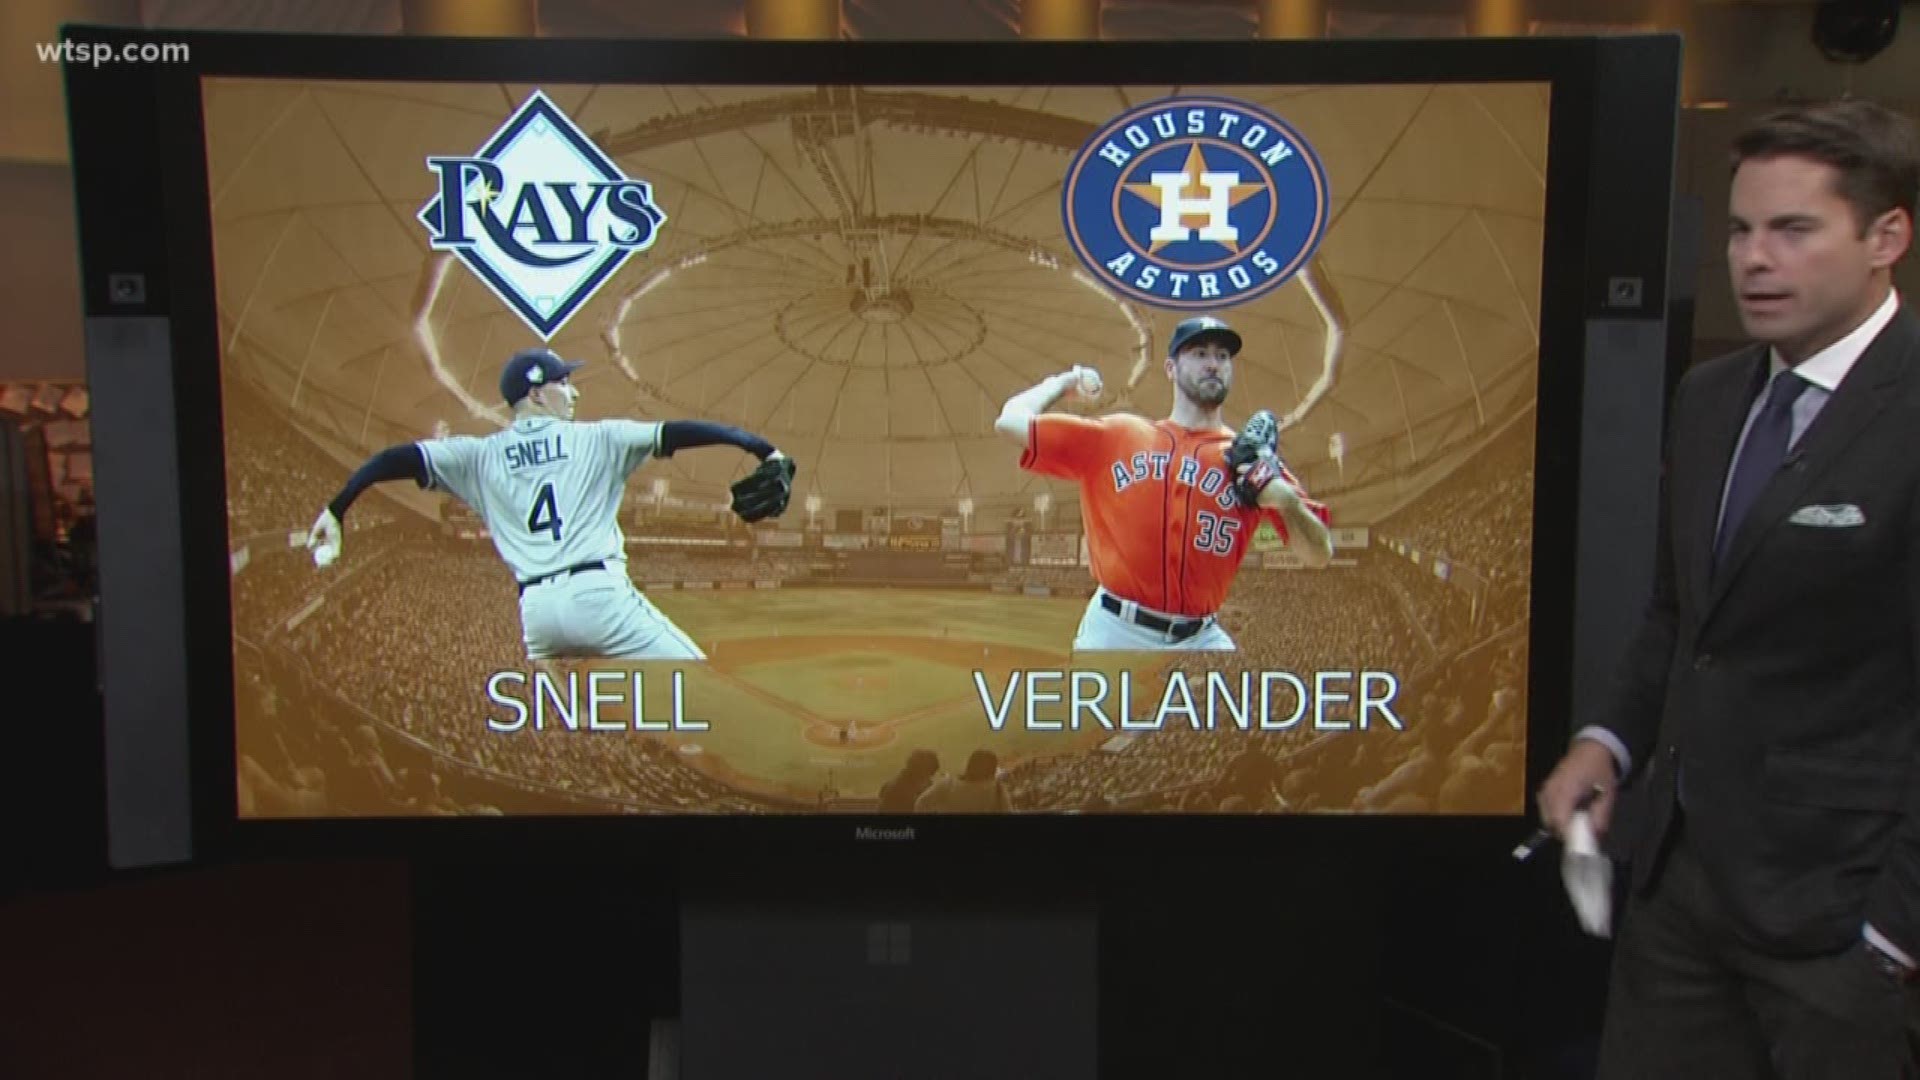 A pair of Cy Young winners get the starting nods for each team as Tampa Bay's Blake Snell takes the mound against Houston's Justin Verlander. https://on.wtsp.com/2uwTian